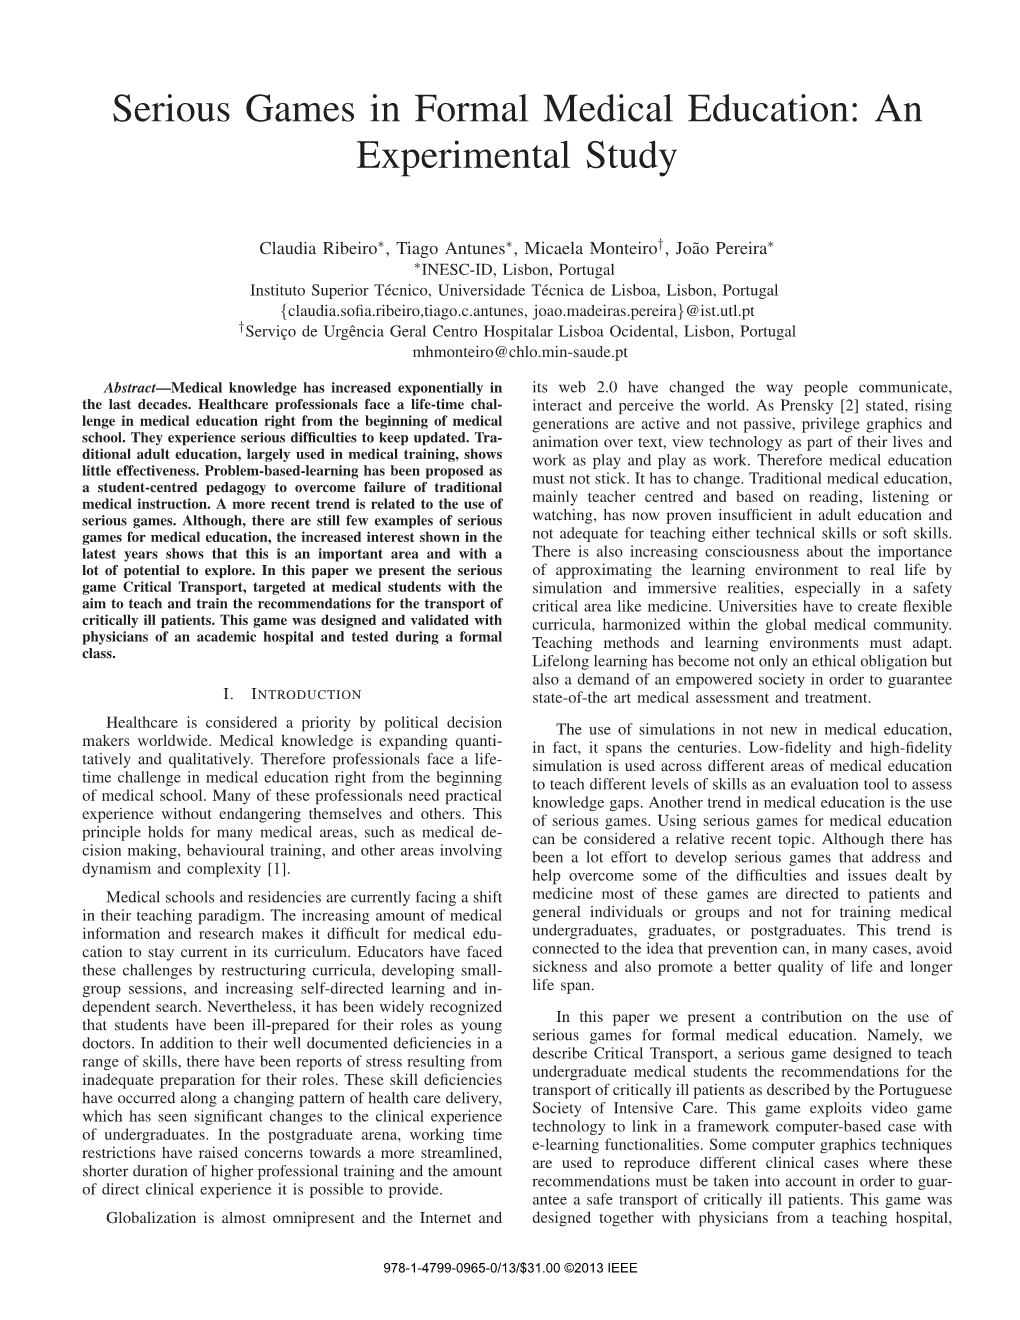 Serious Games in Formal Medical Education: an Experimental Study